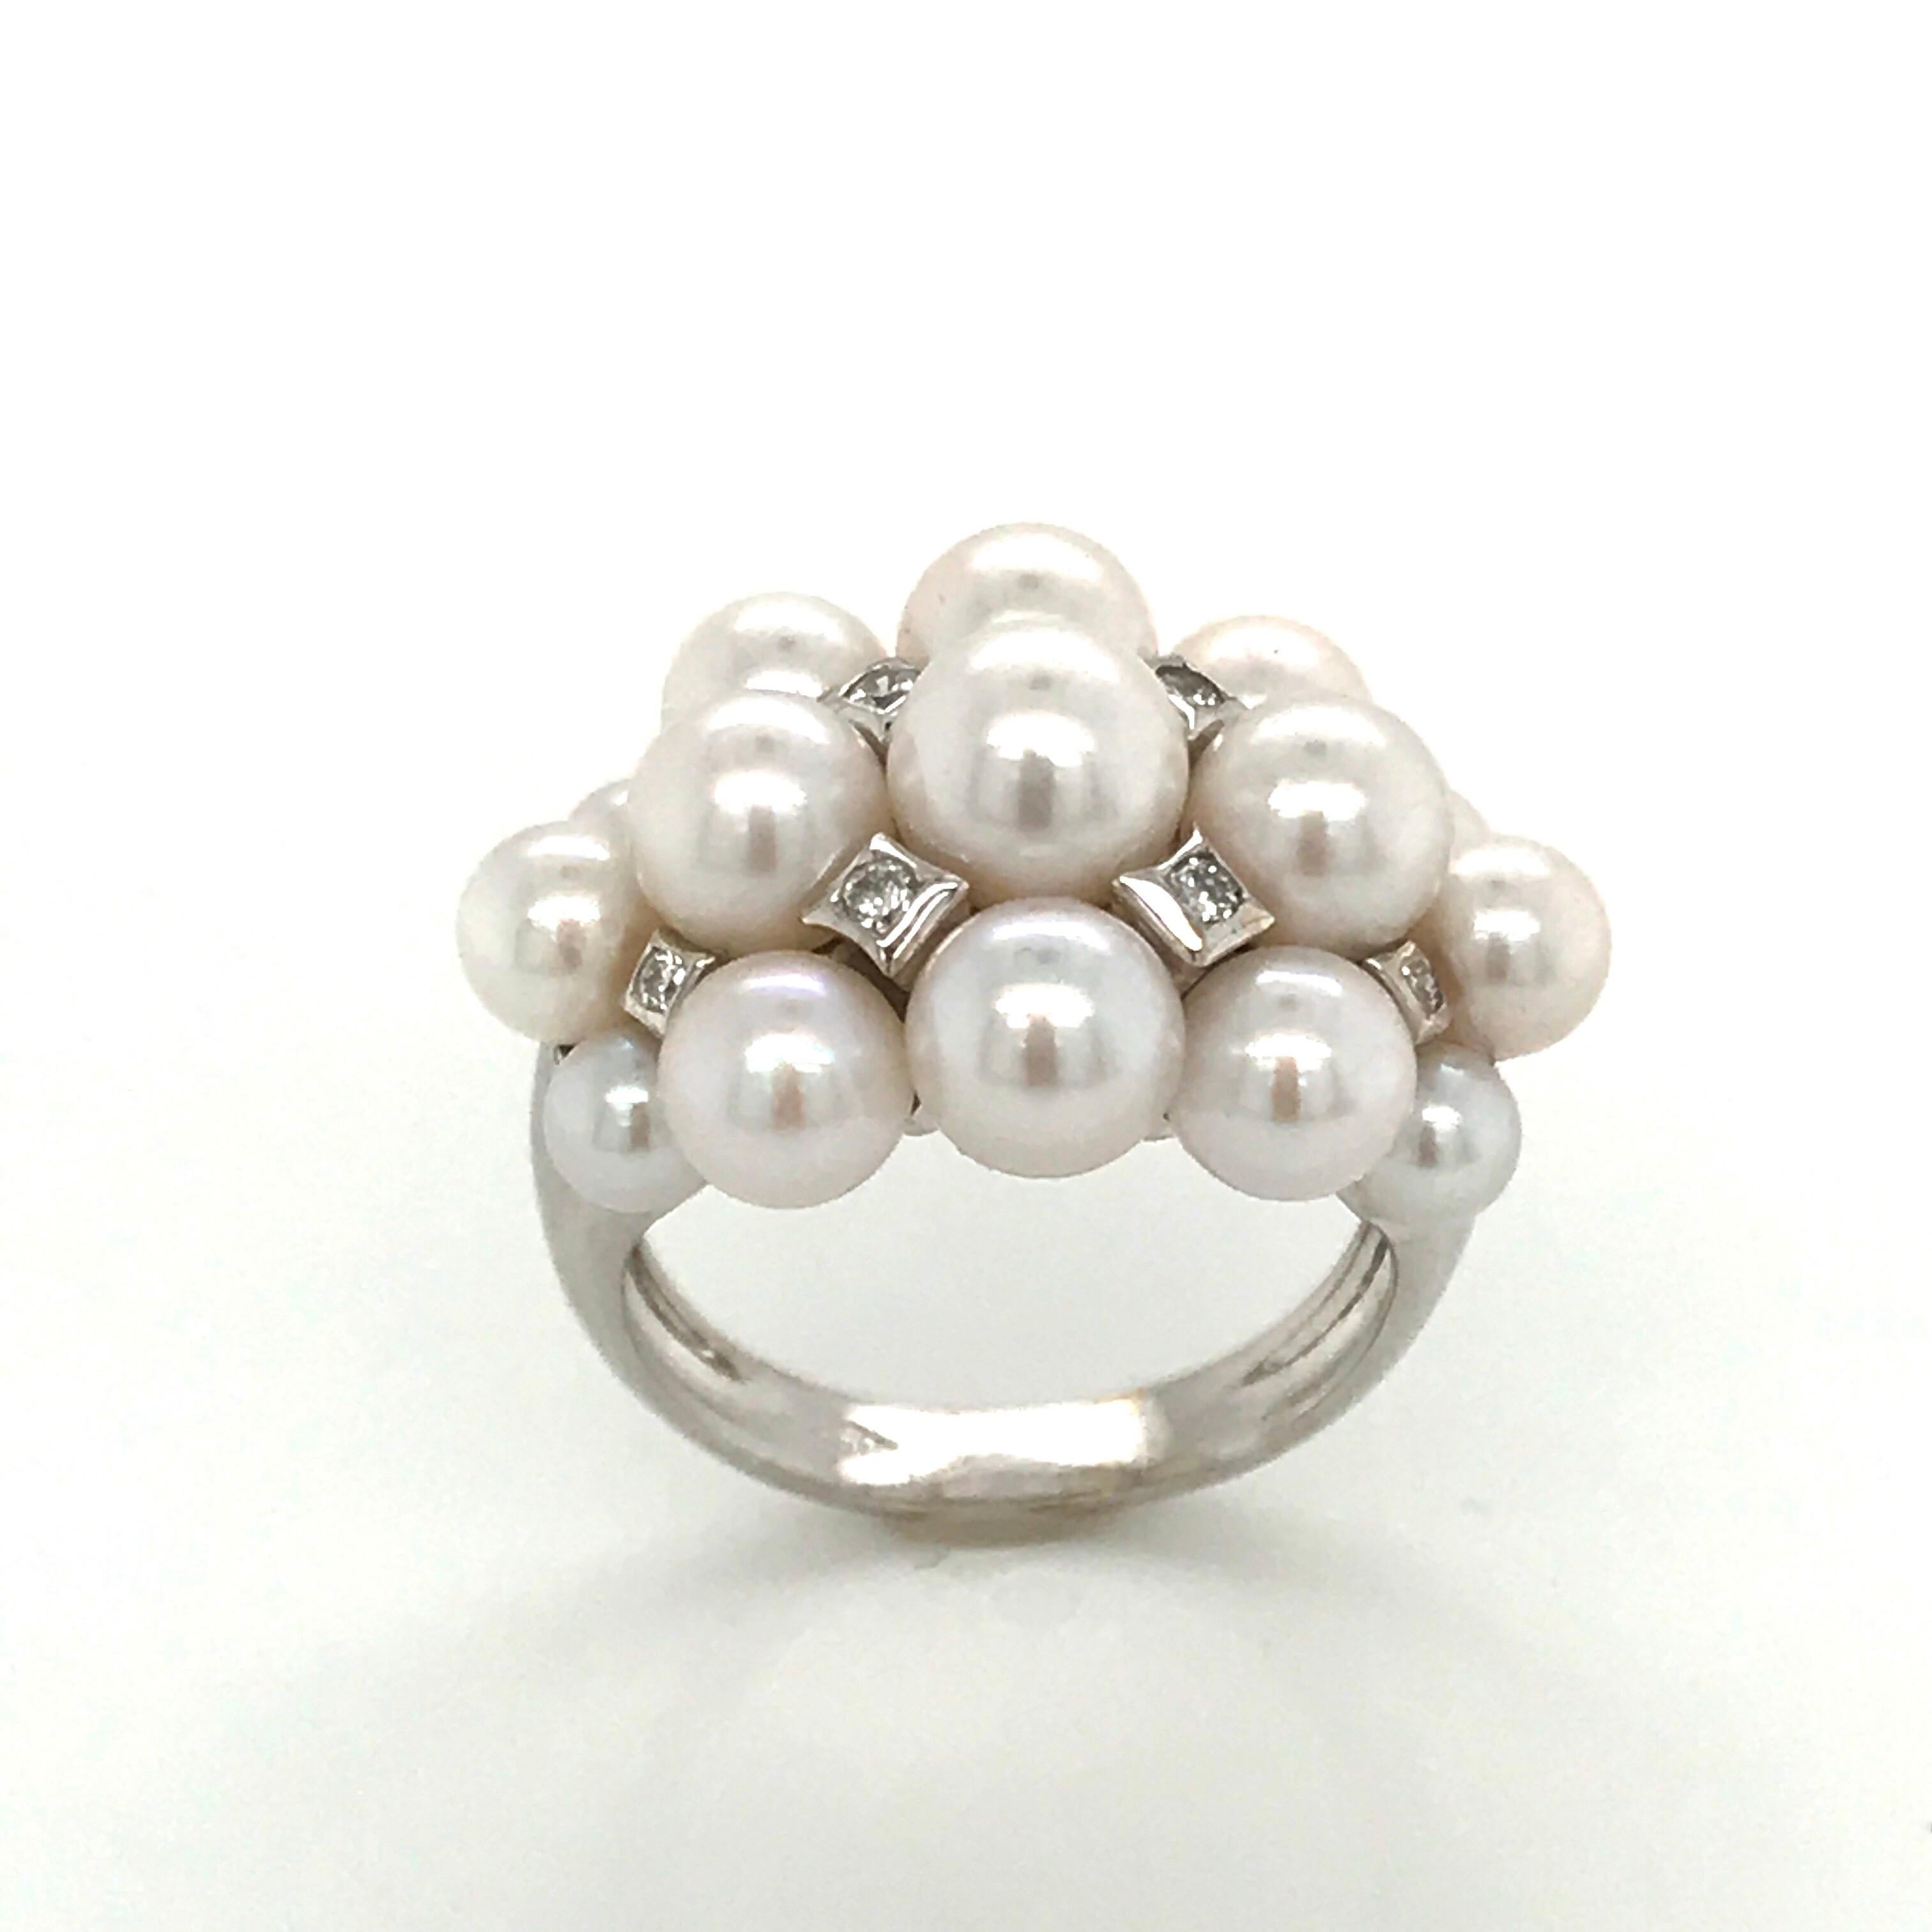 Discover this Akoya Cultured Pearls and White Diamonds on White Gold 18K Dome Ring.
15 Akoya Cultured Pearls 4-6.5 cm 
White Diamonds 0.29K
White Gold 18K 
French Size 53
US Size 6.5